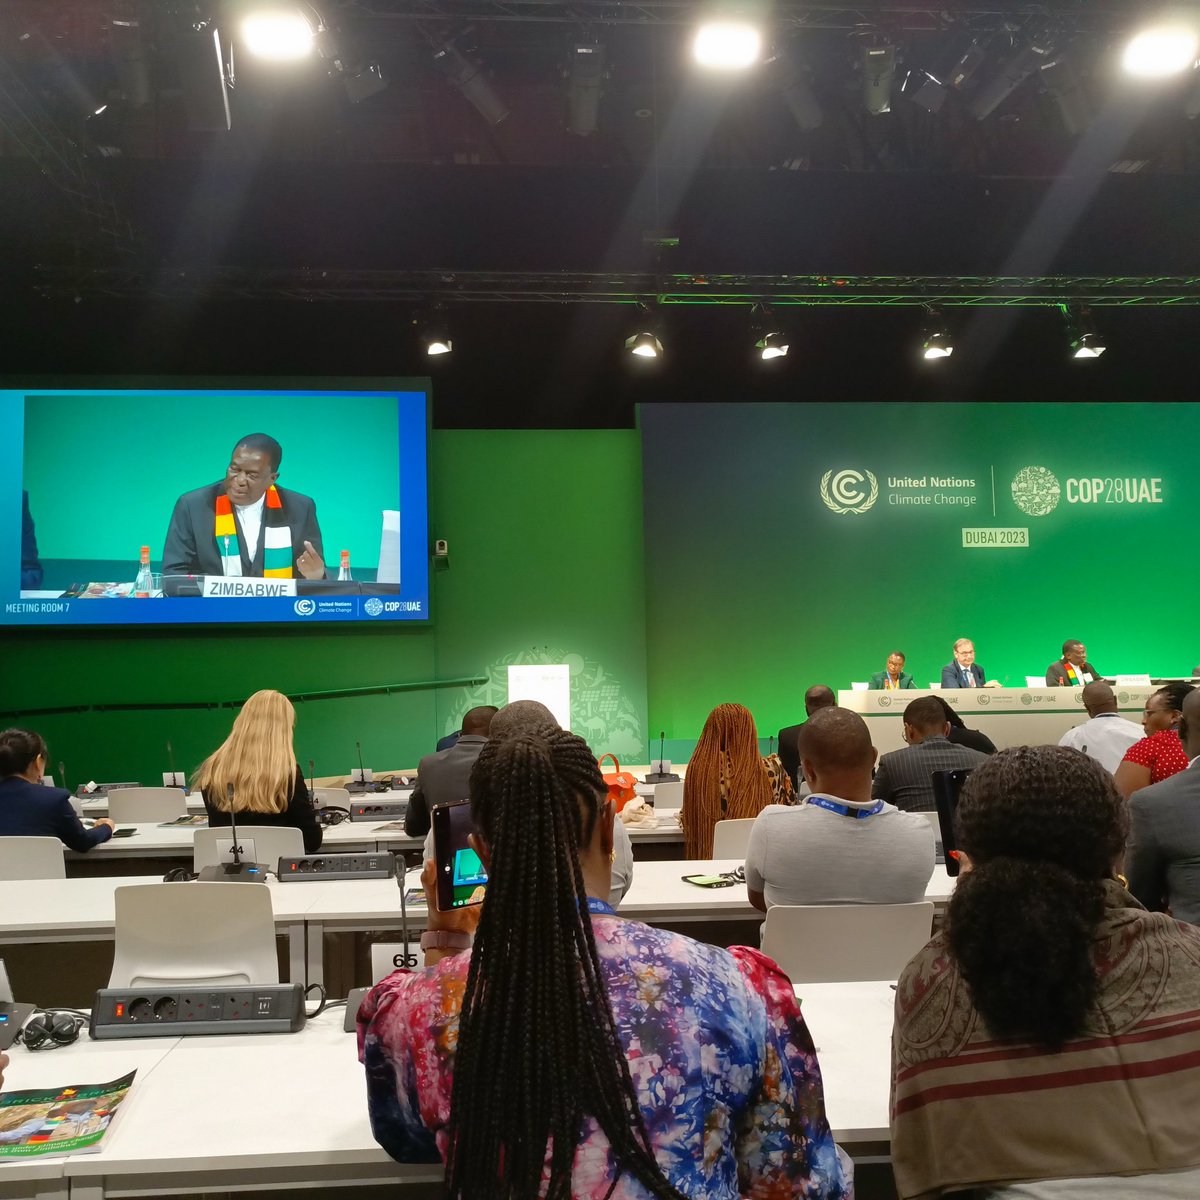 Zimbabwe using agroecological techniques to alleviate hunger, says President Mnangagwa @COP28_UAE in Dubai @Afsafrica @AGNESAfrica1 @UNFCCC